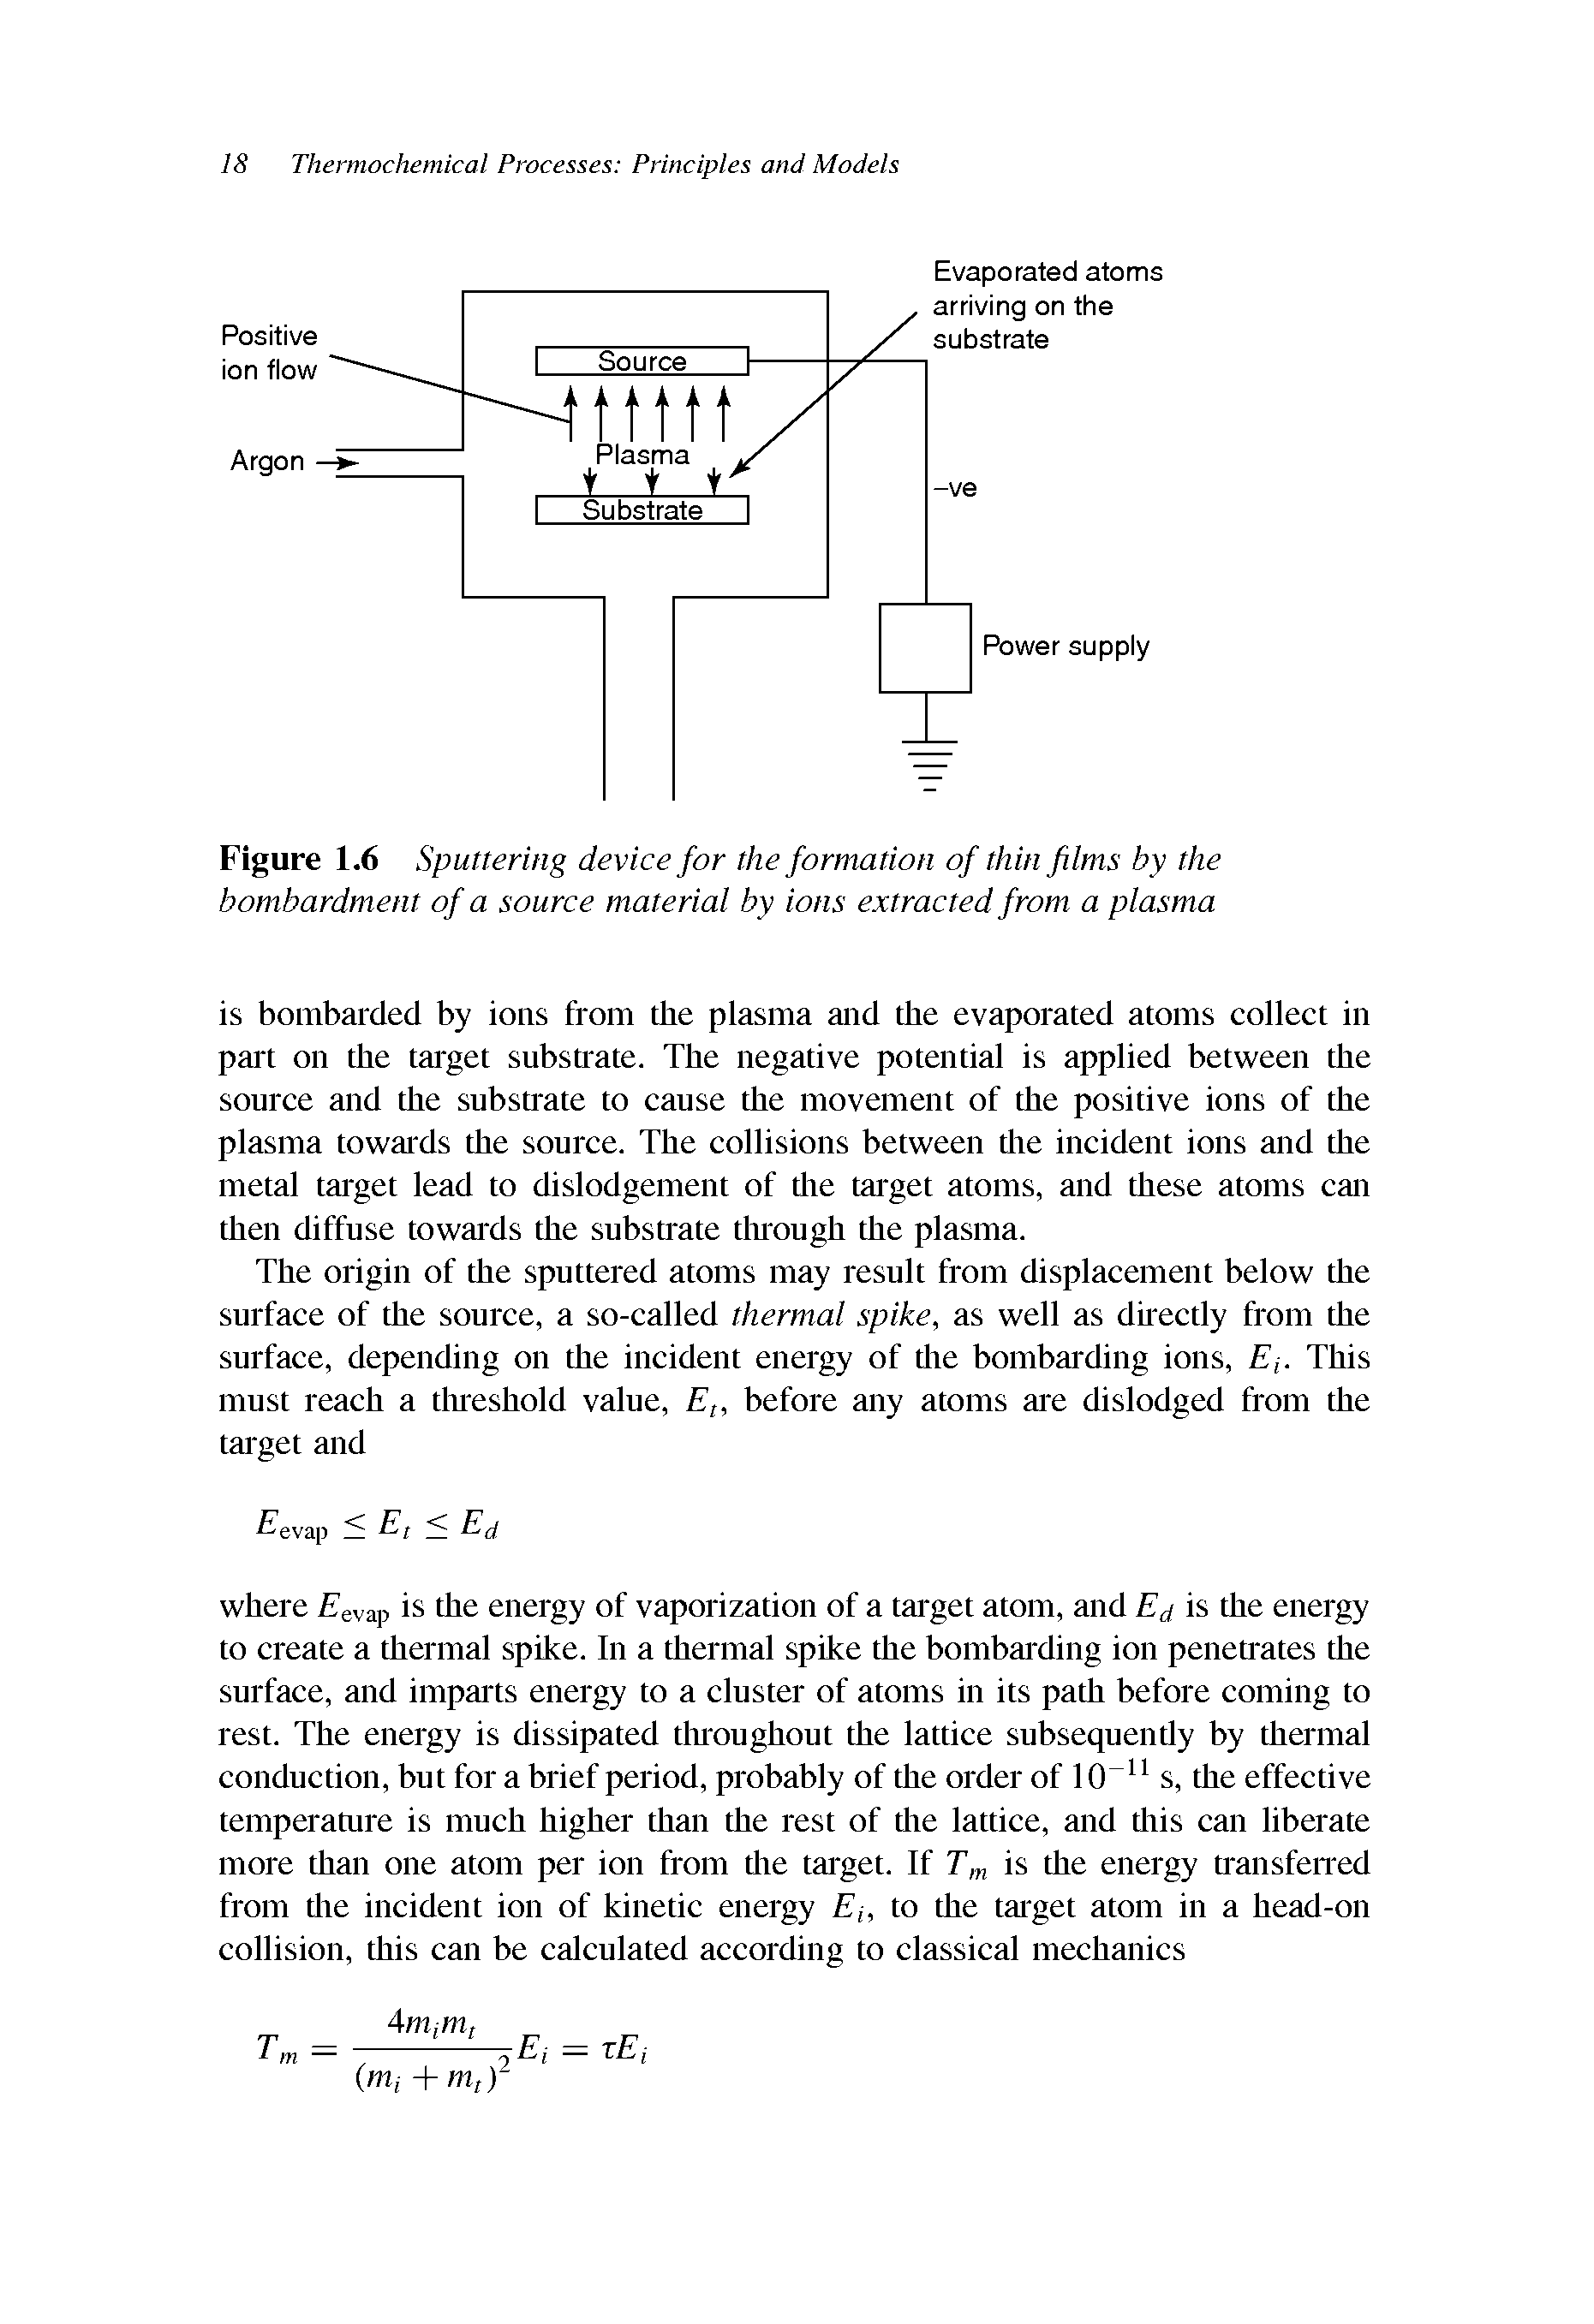 Figure 1.6 Sputtering device for the formation of thin films by the bombardment of a source material by ions extracted from a plasma...